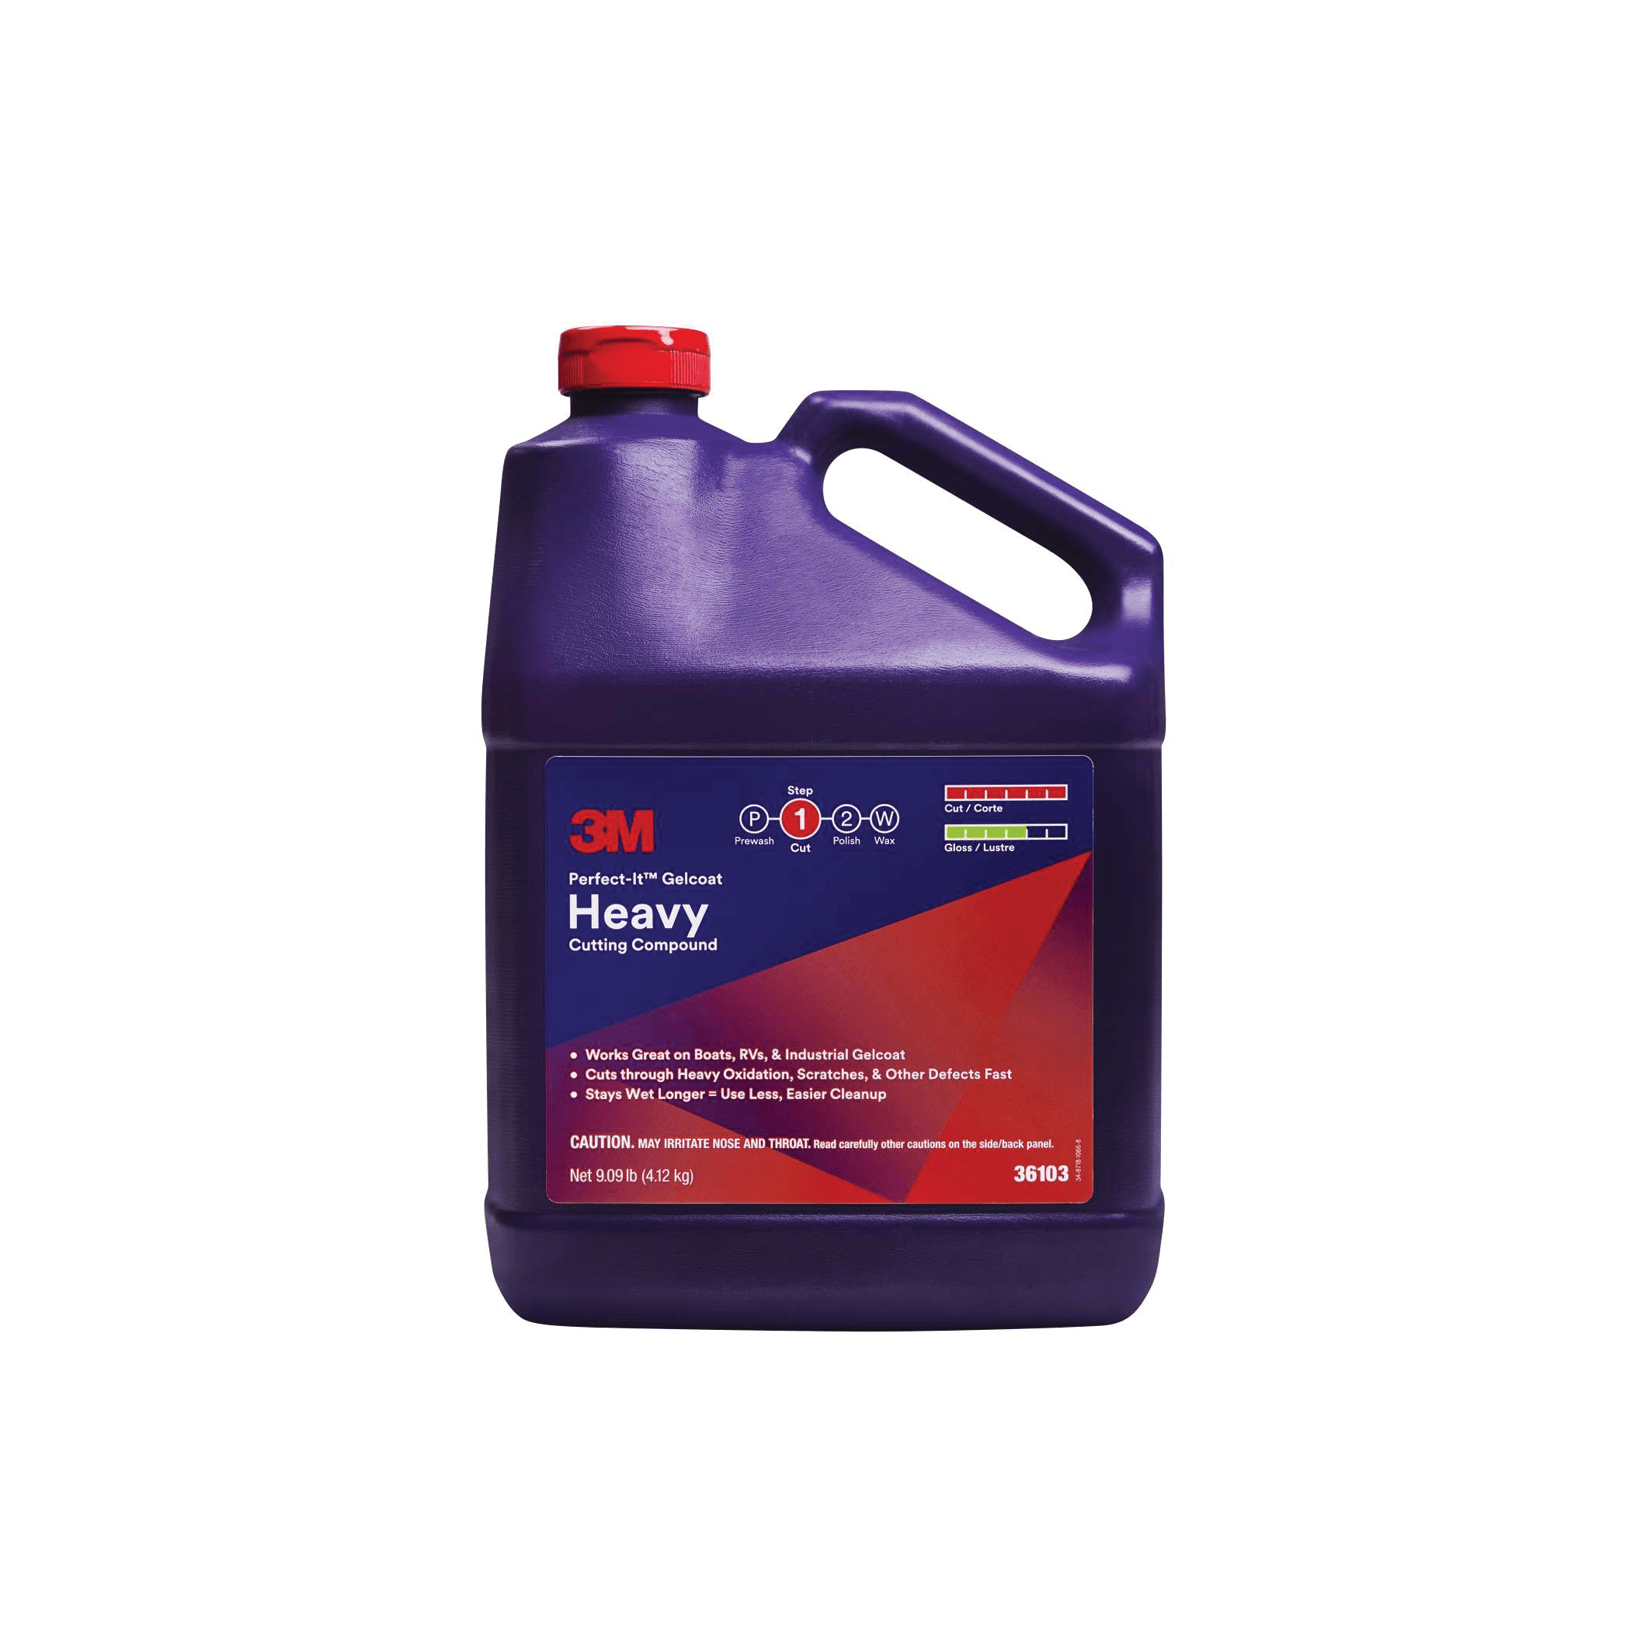 3M Perfect-It Gelcoat Heavy Cutting Compound, 36101, 1 Pint, Fiberglass Oxidation Remover for Boats and RVs